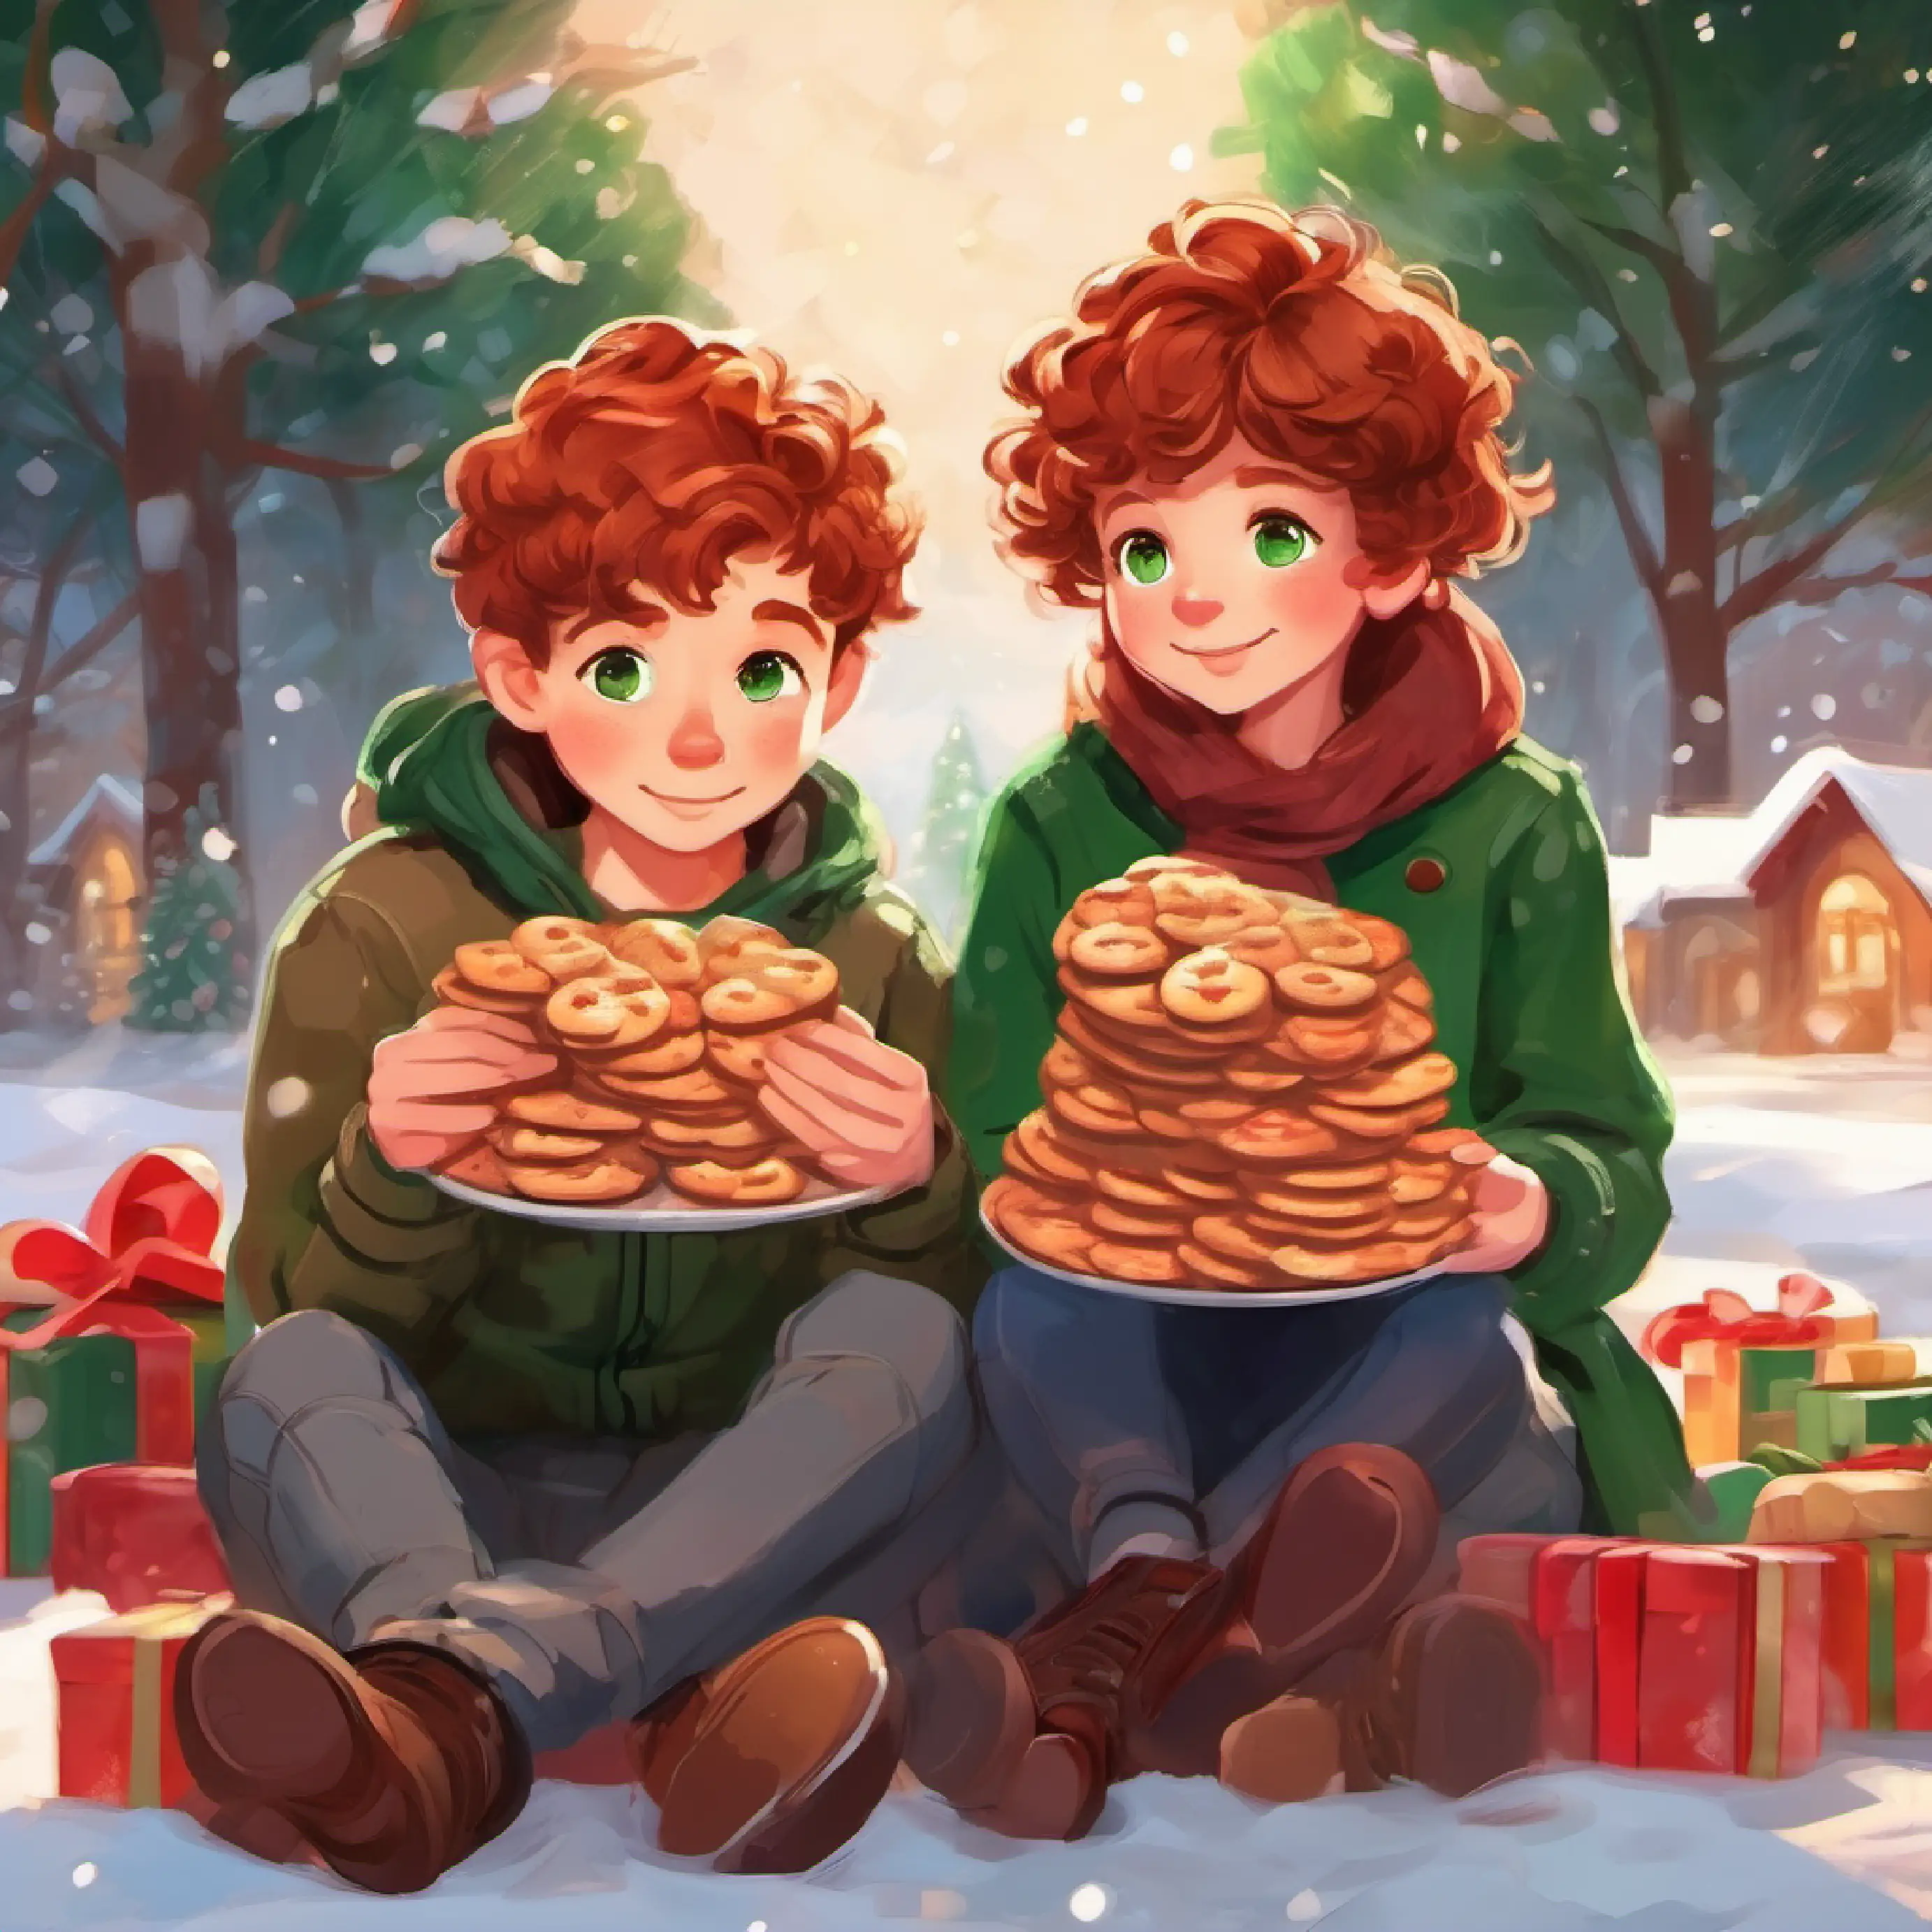 Thoughtful boy, short brown hair, green eyes and Shy girl, curly red hair, freckles sharing cookies, feeling happy.